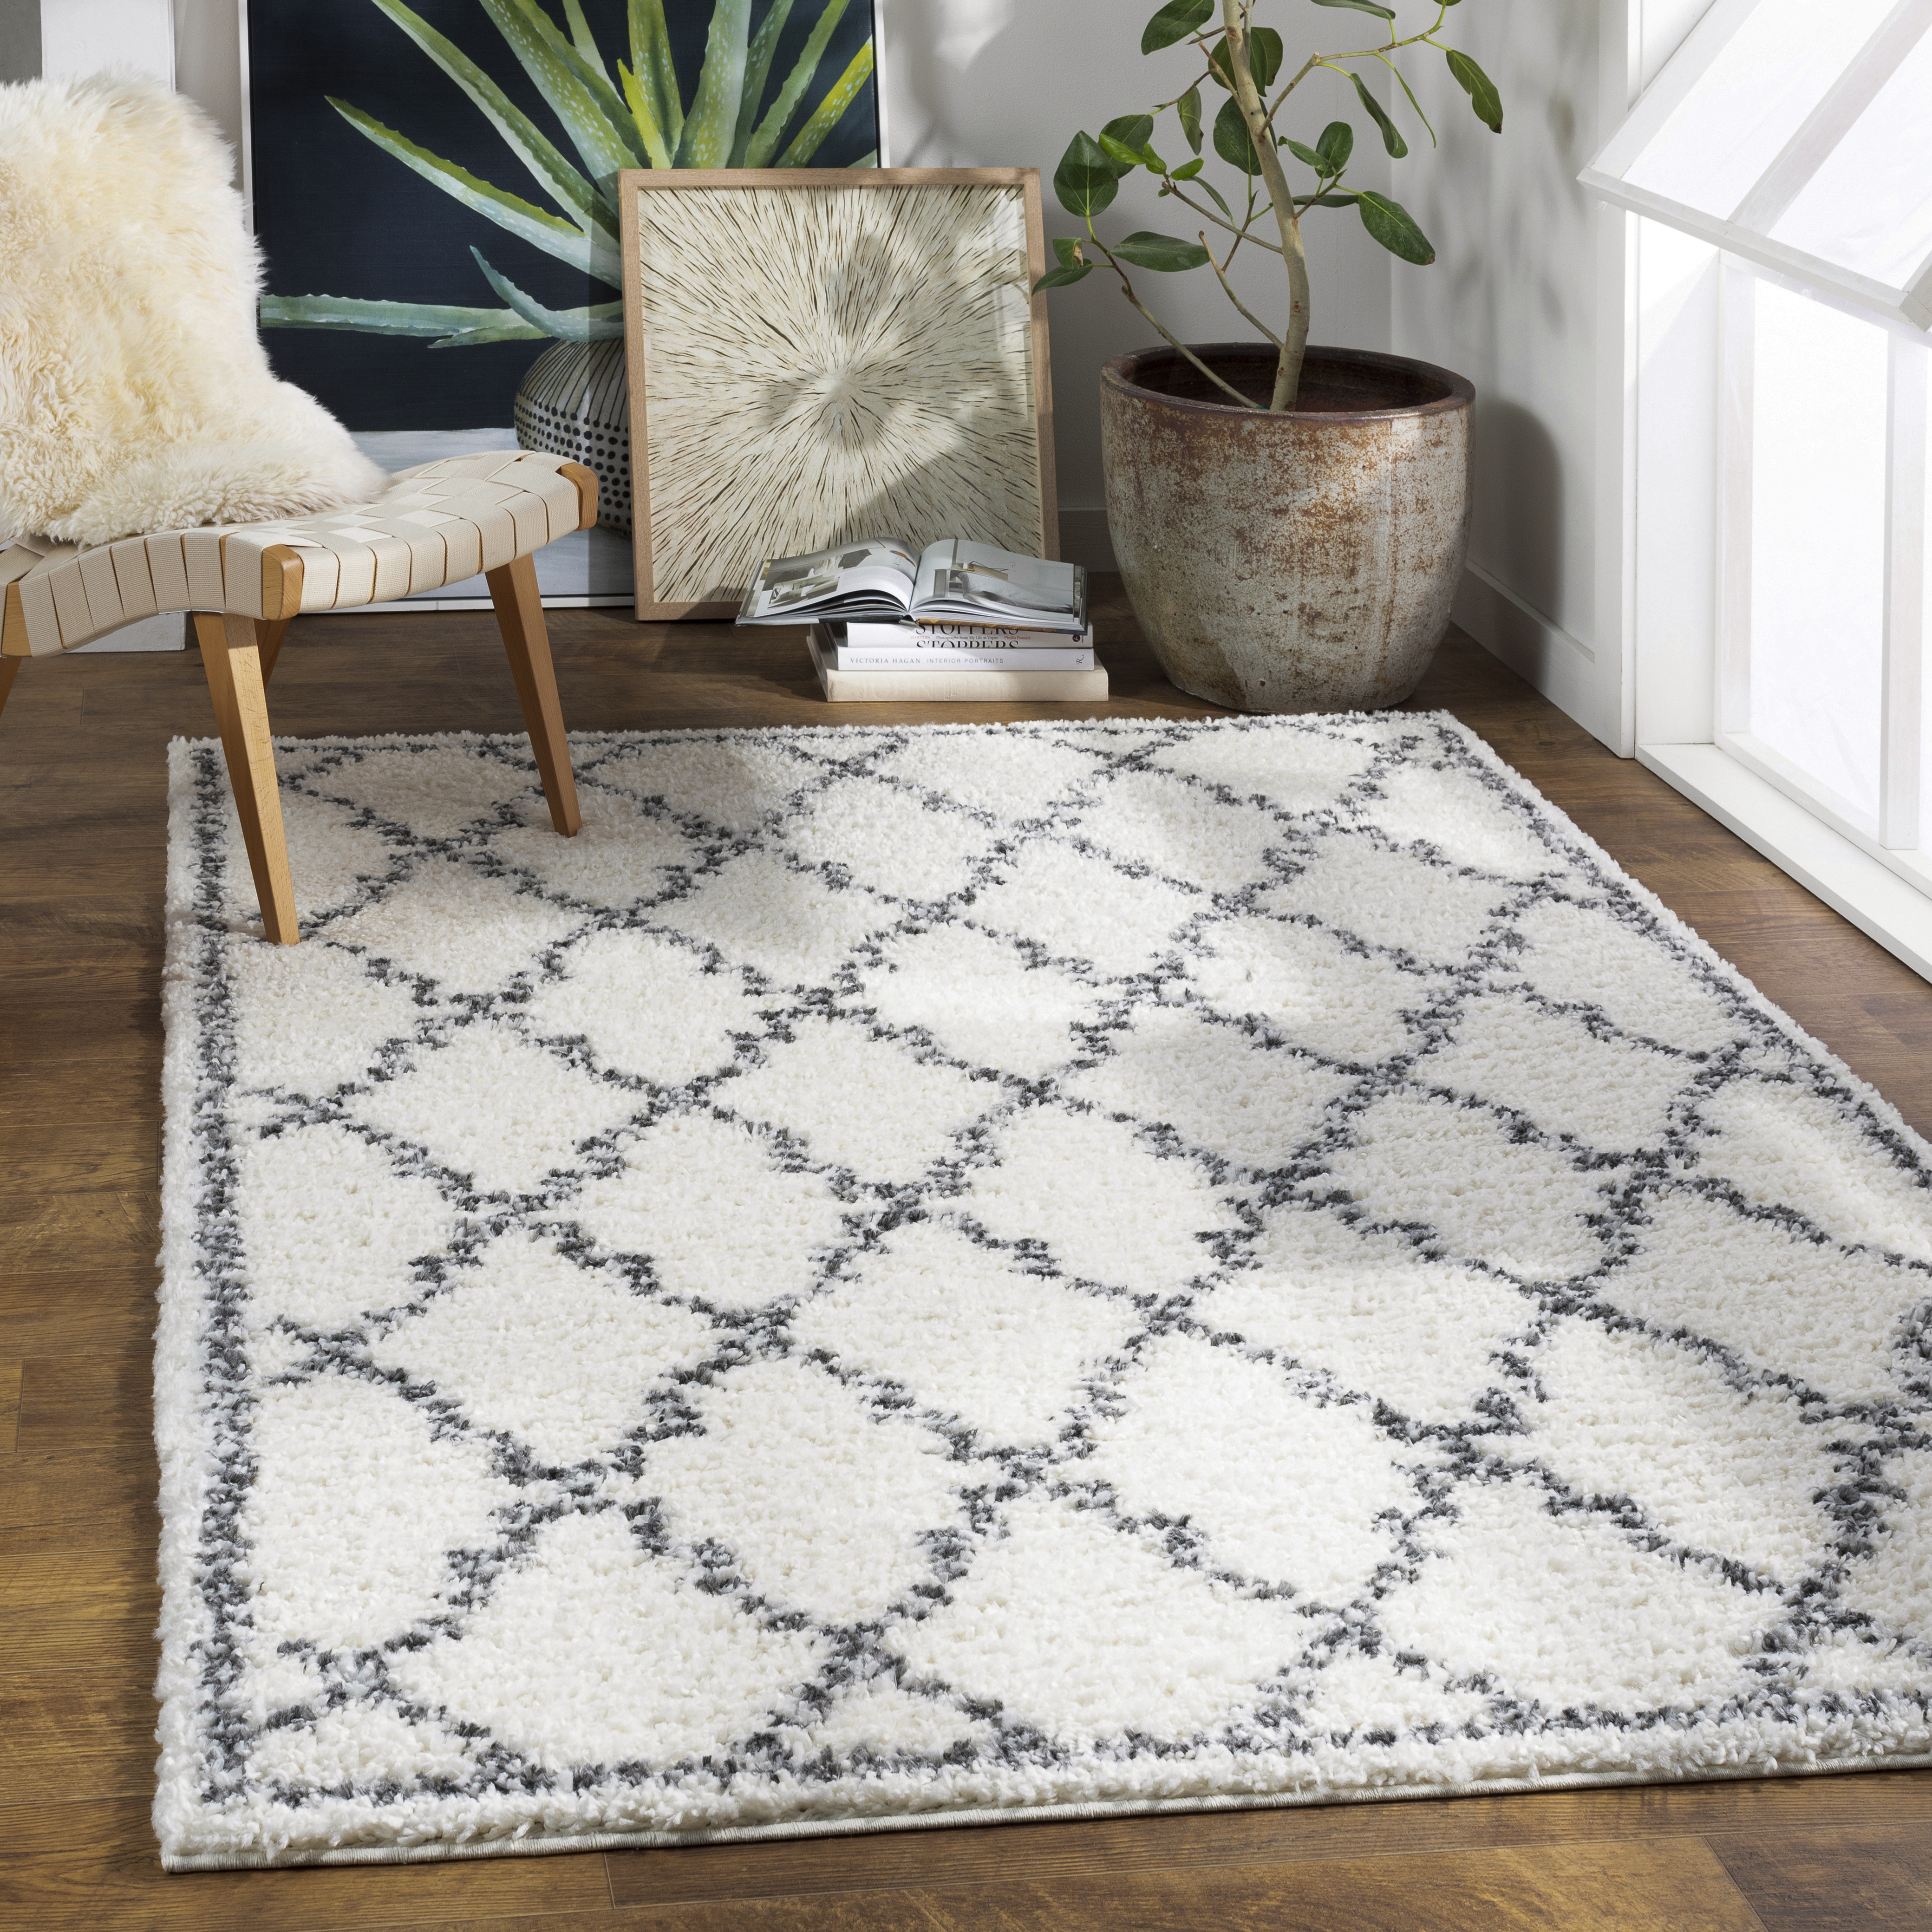 Deluxe Shag Rug, 7'10" x 10'3" - Image 1